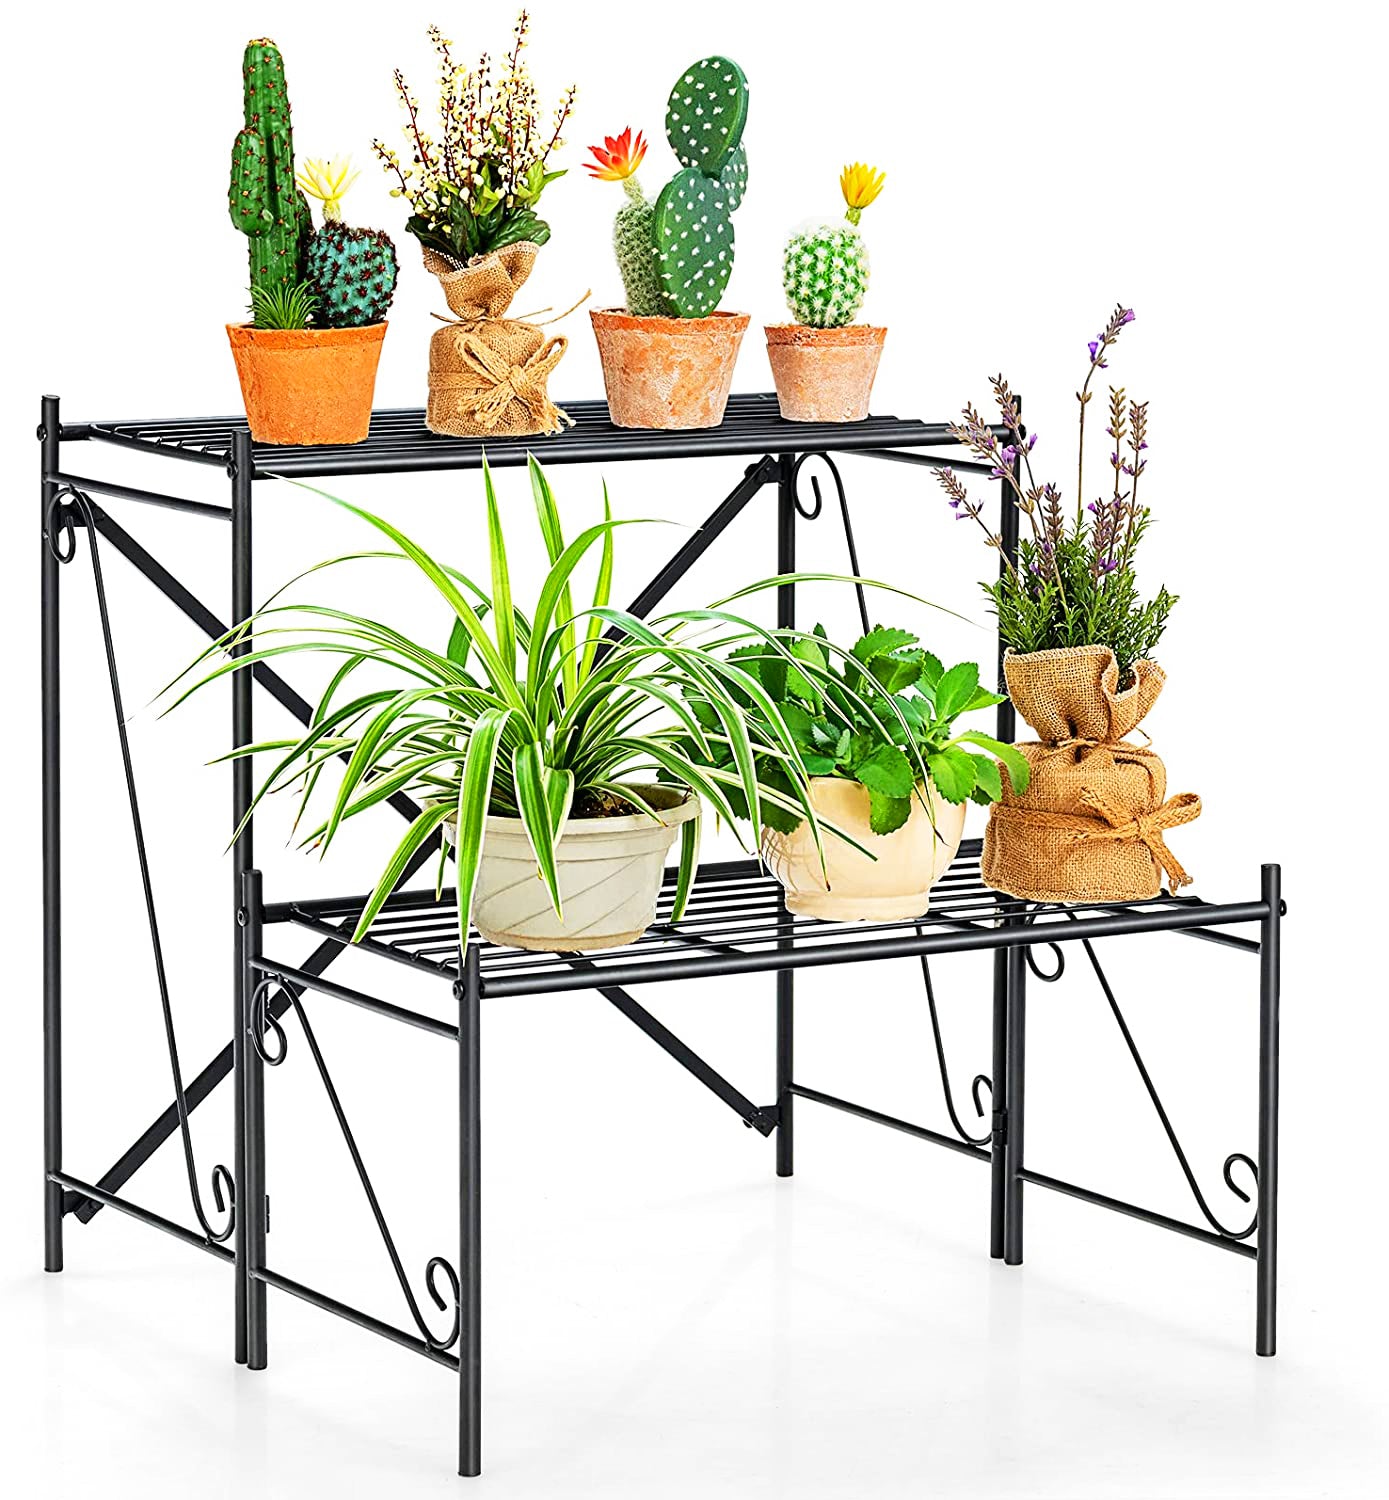 24 in. Tall Outdoor Black Metal Plant Stand (2-Tiered)